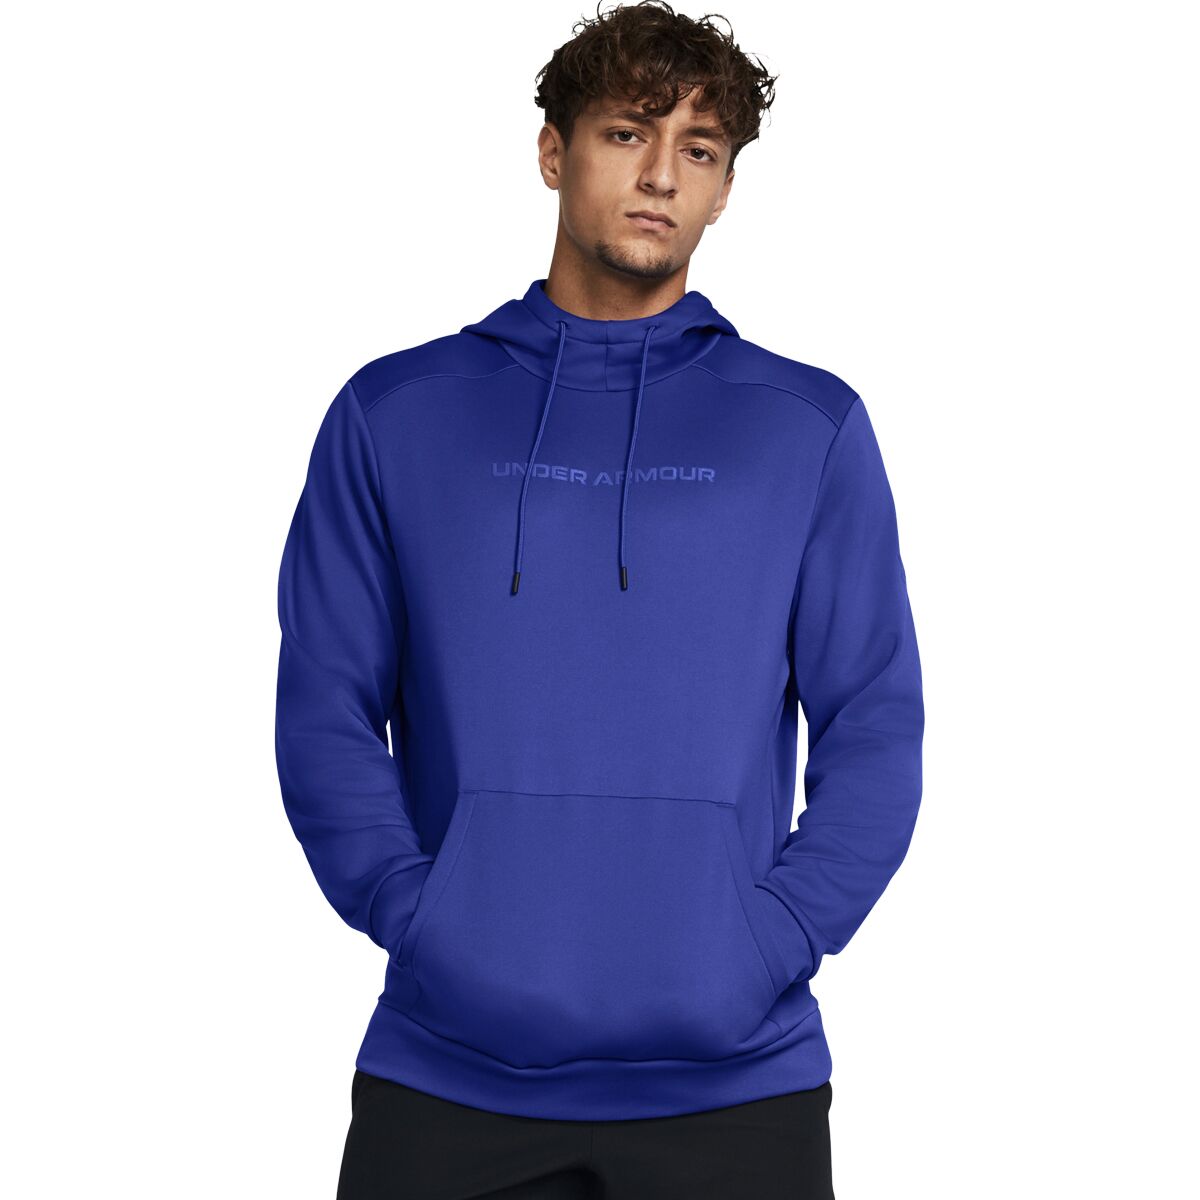 Under Armour Armour Fleece Graphic HD Pullover Hoodie - Men's